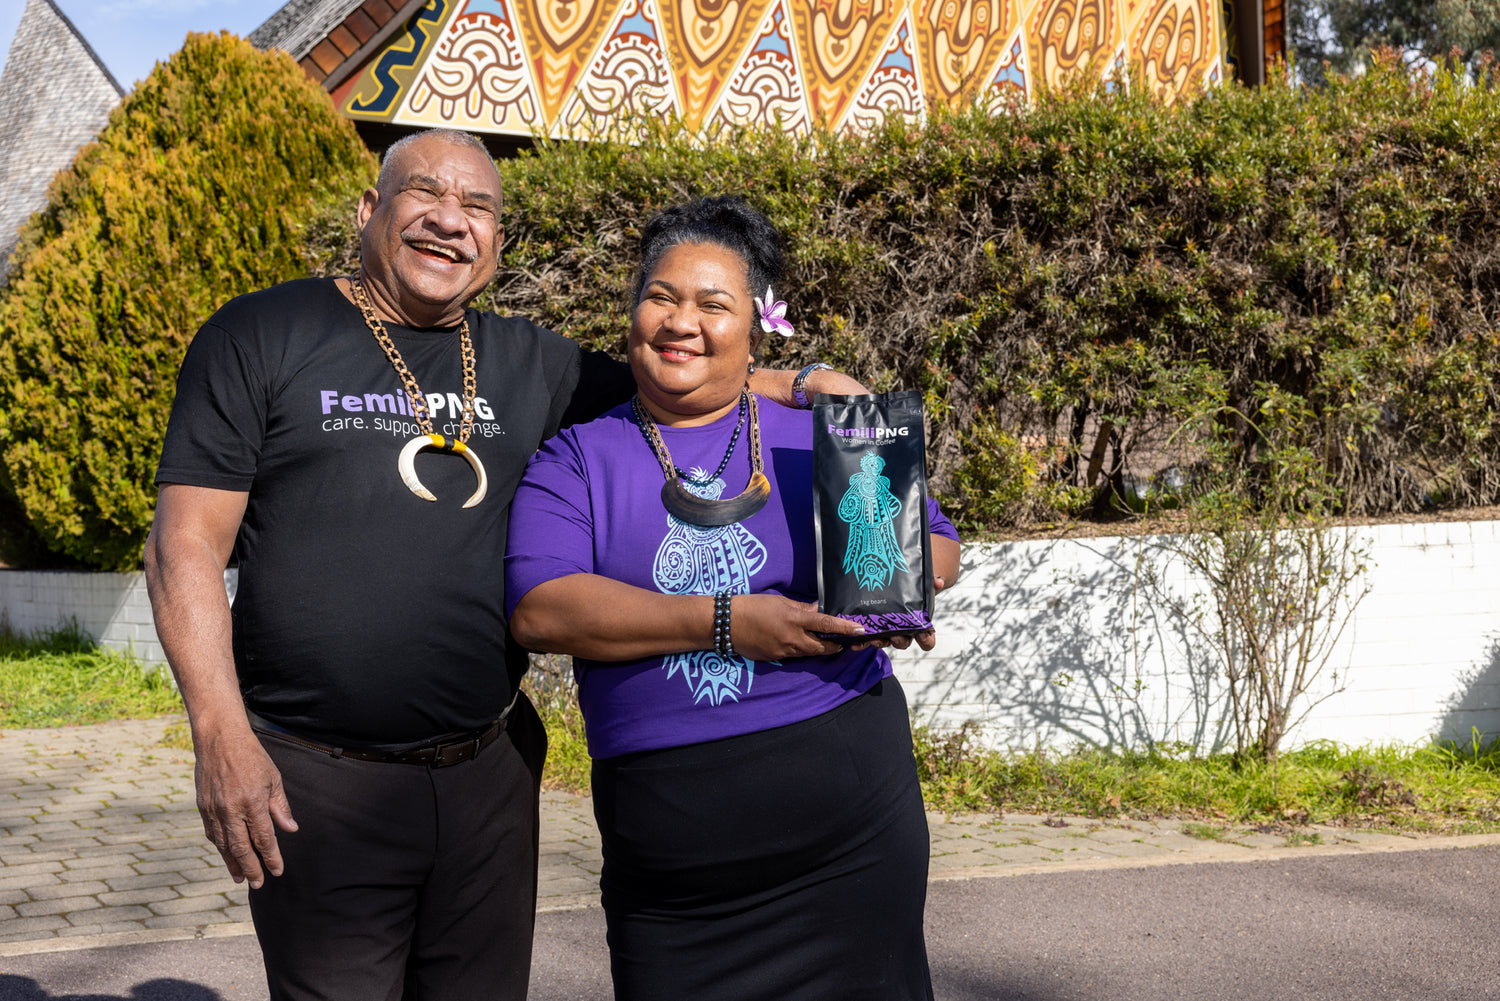 His Excellency John Ma'o Kali, High Commissioner to Australia for Papua New Guinea, and his wife, Vavinenama Vere Kali with Femili PNG coffee